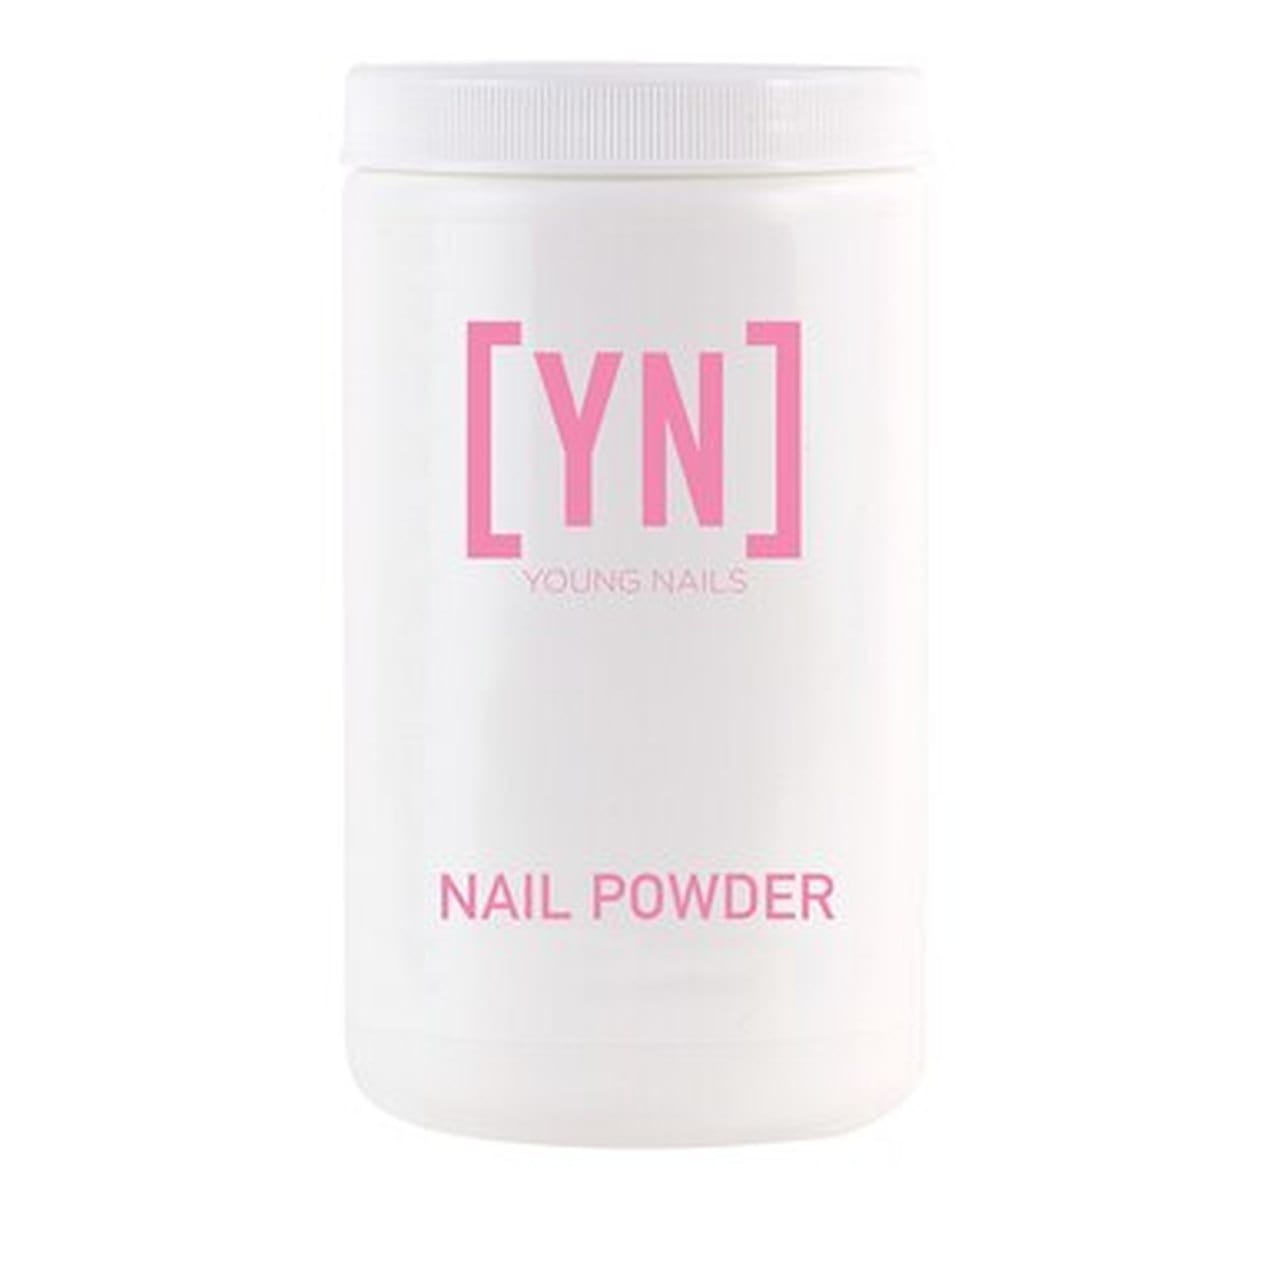 660g Speed Pink Powder Nails - Young Nails - Luxe Pacifique